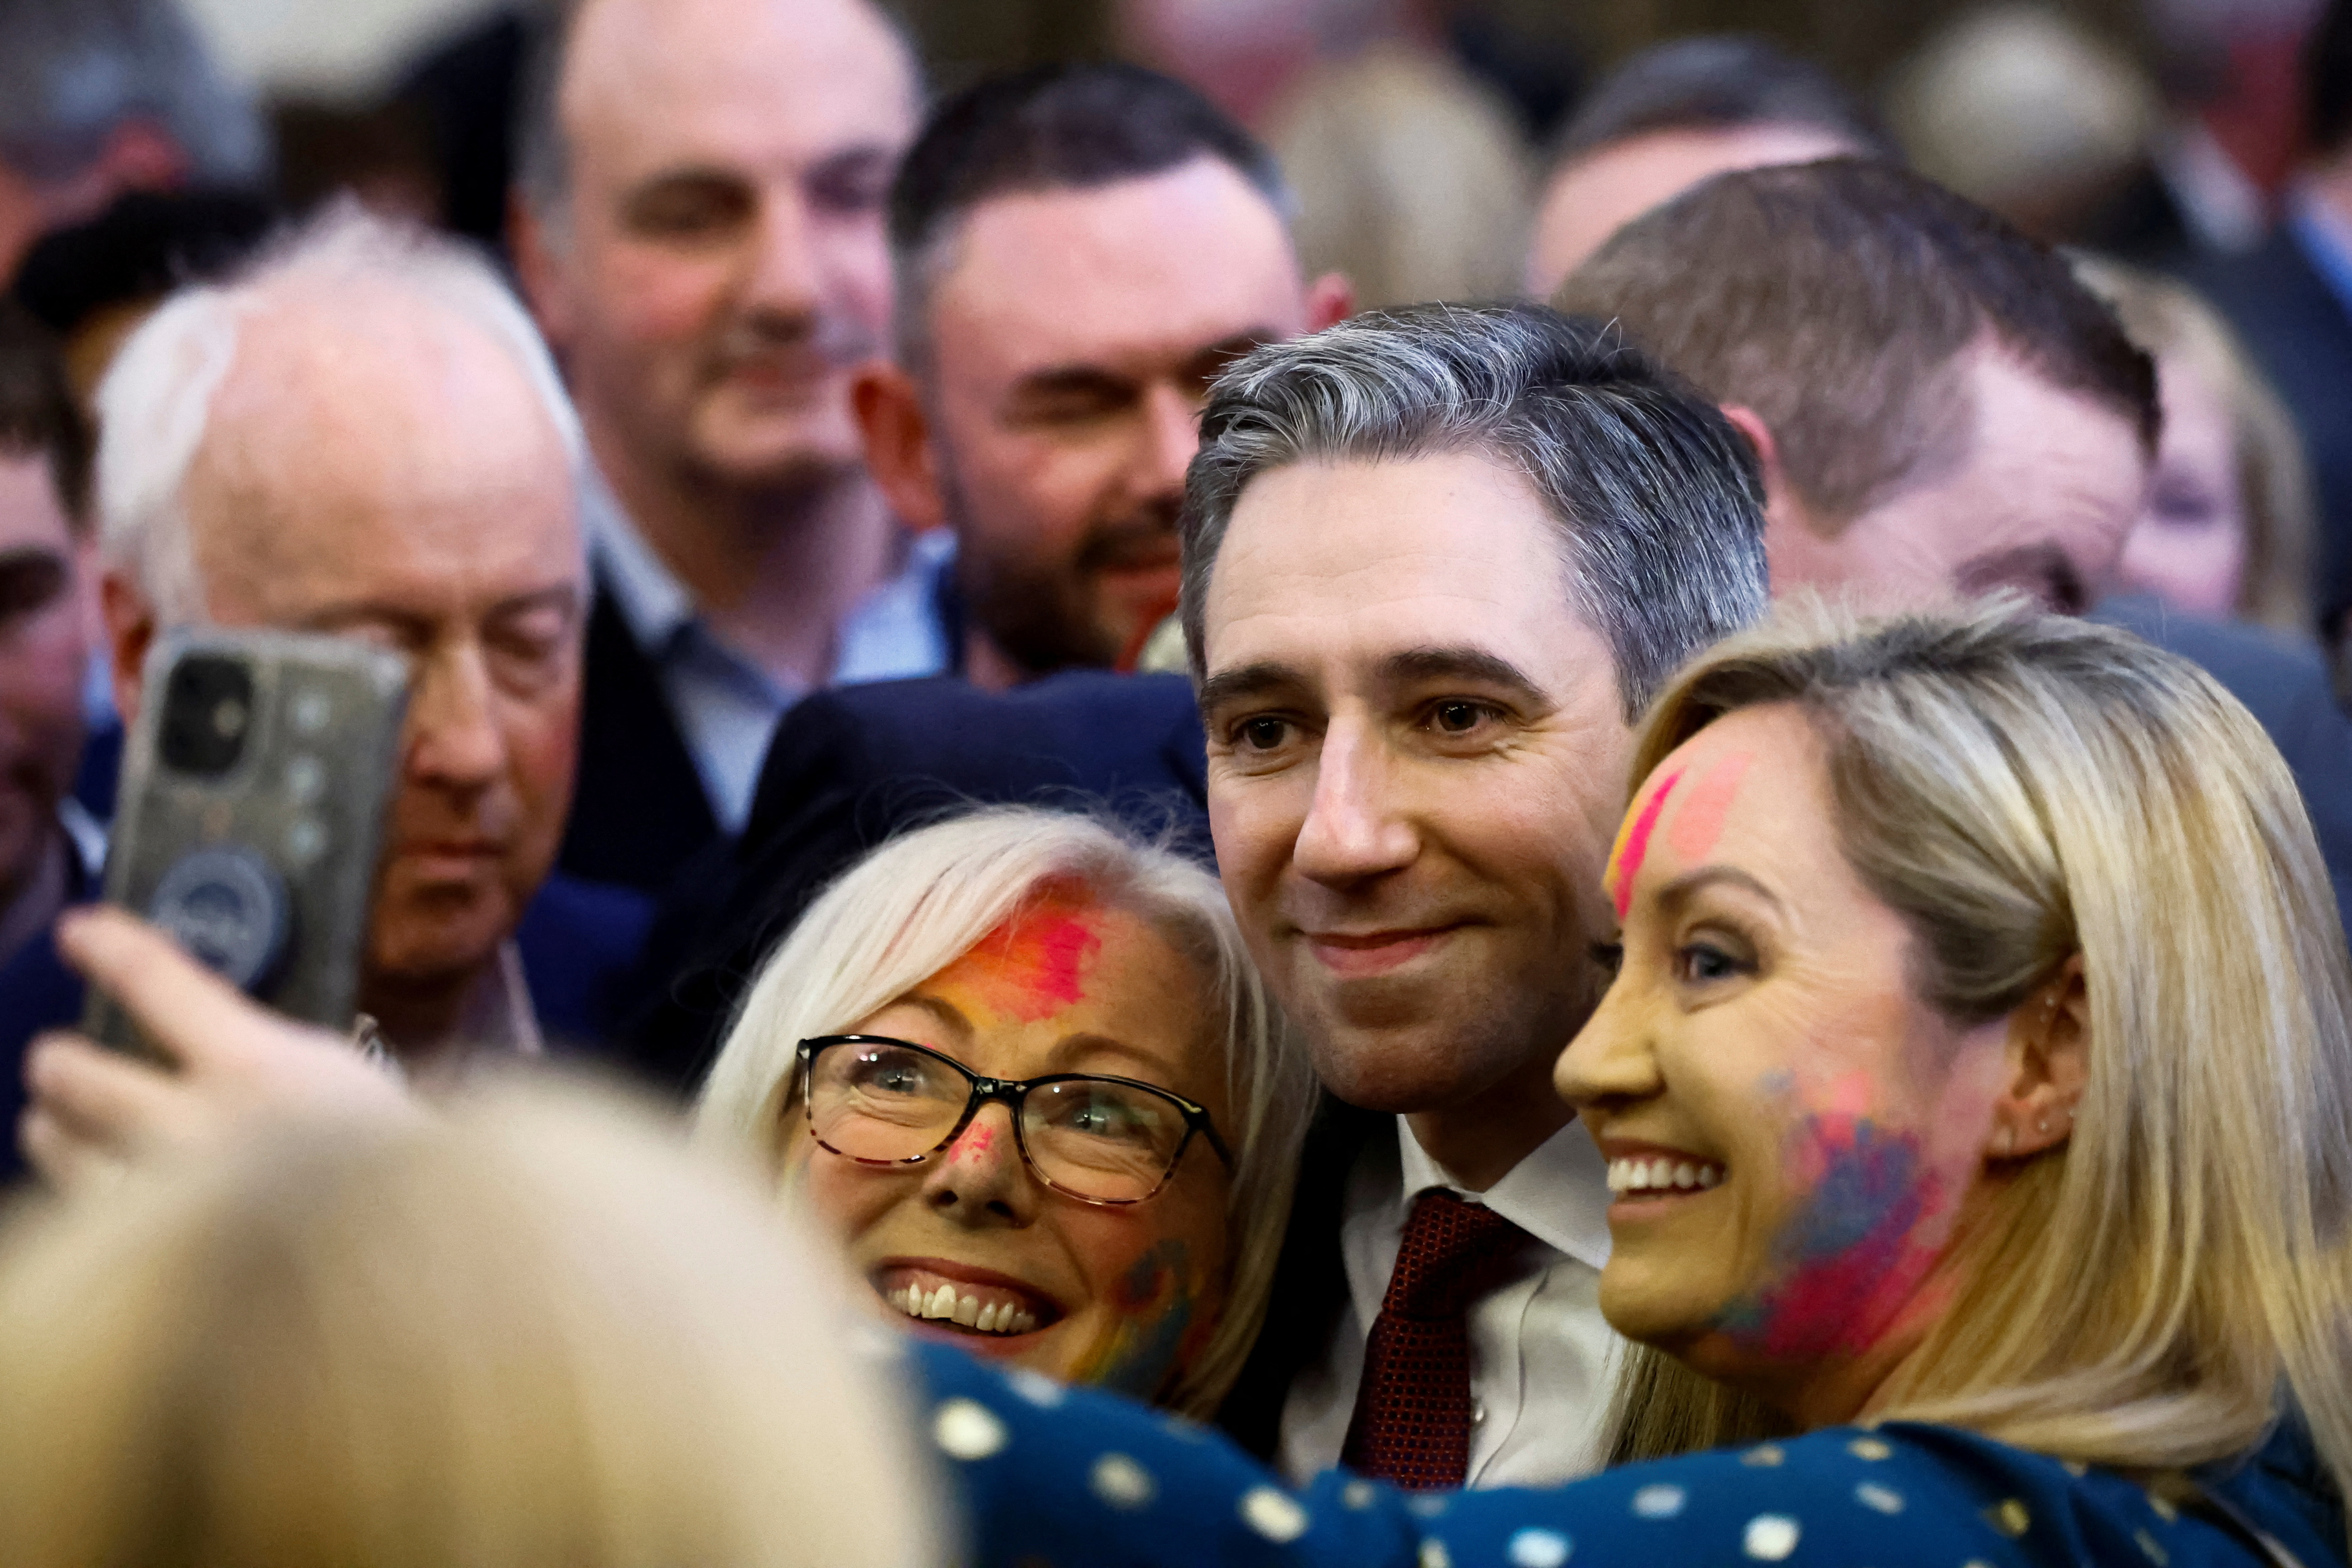 Ireland's Minister for Higher Education Simon Harris speaks to the media after being announced as the new leader of Fine Gael, in Athlone